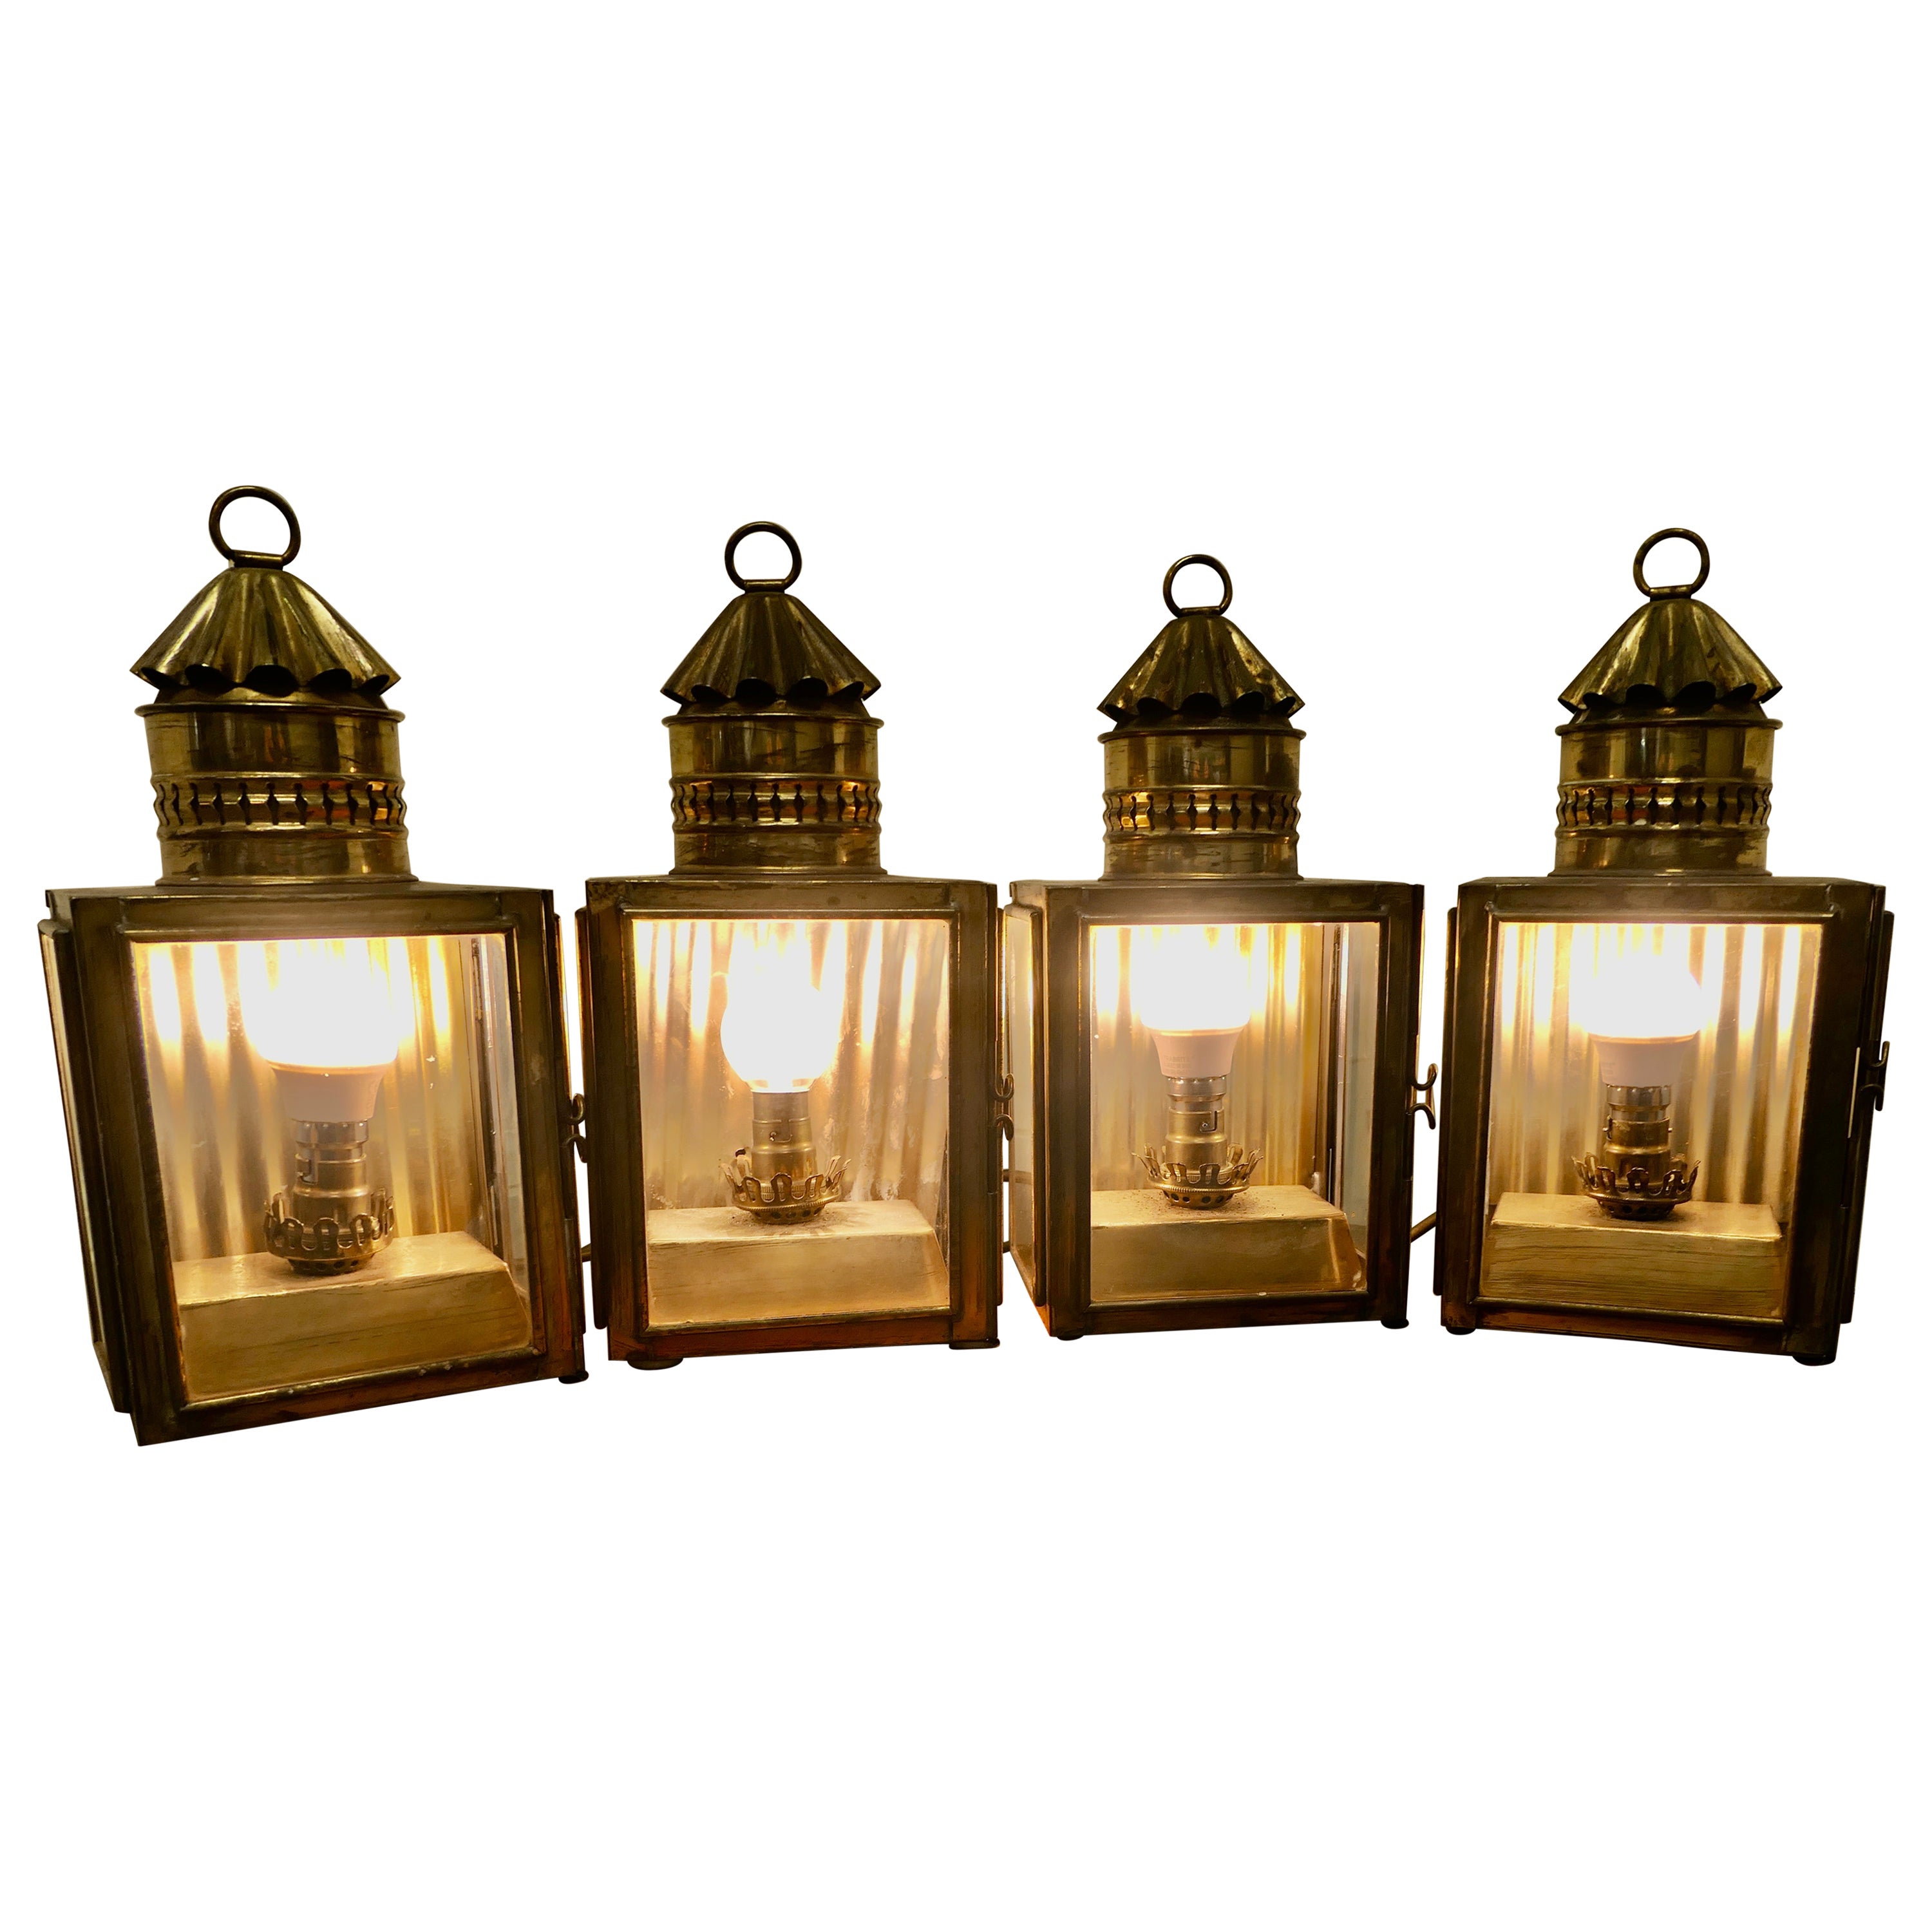 4 Electrified Brass Carriage Lights, Oil Lamps For Sale